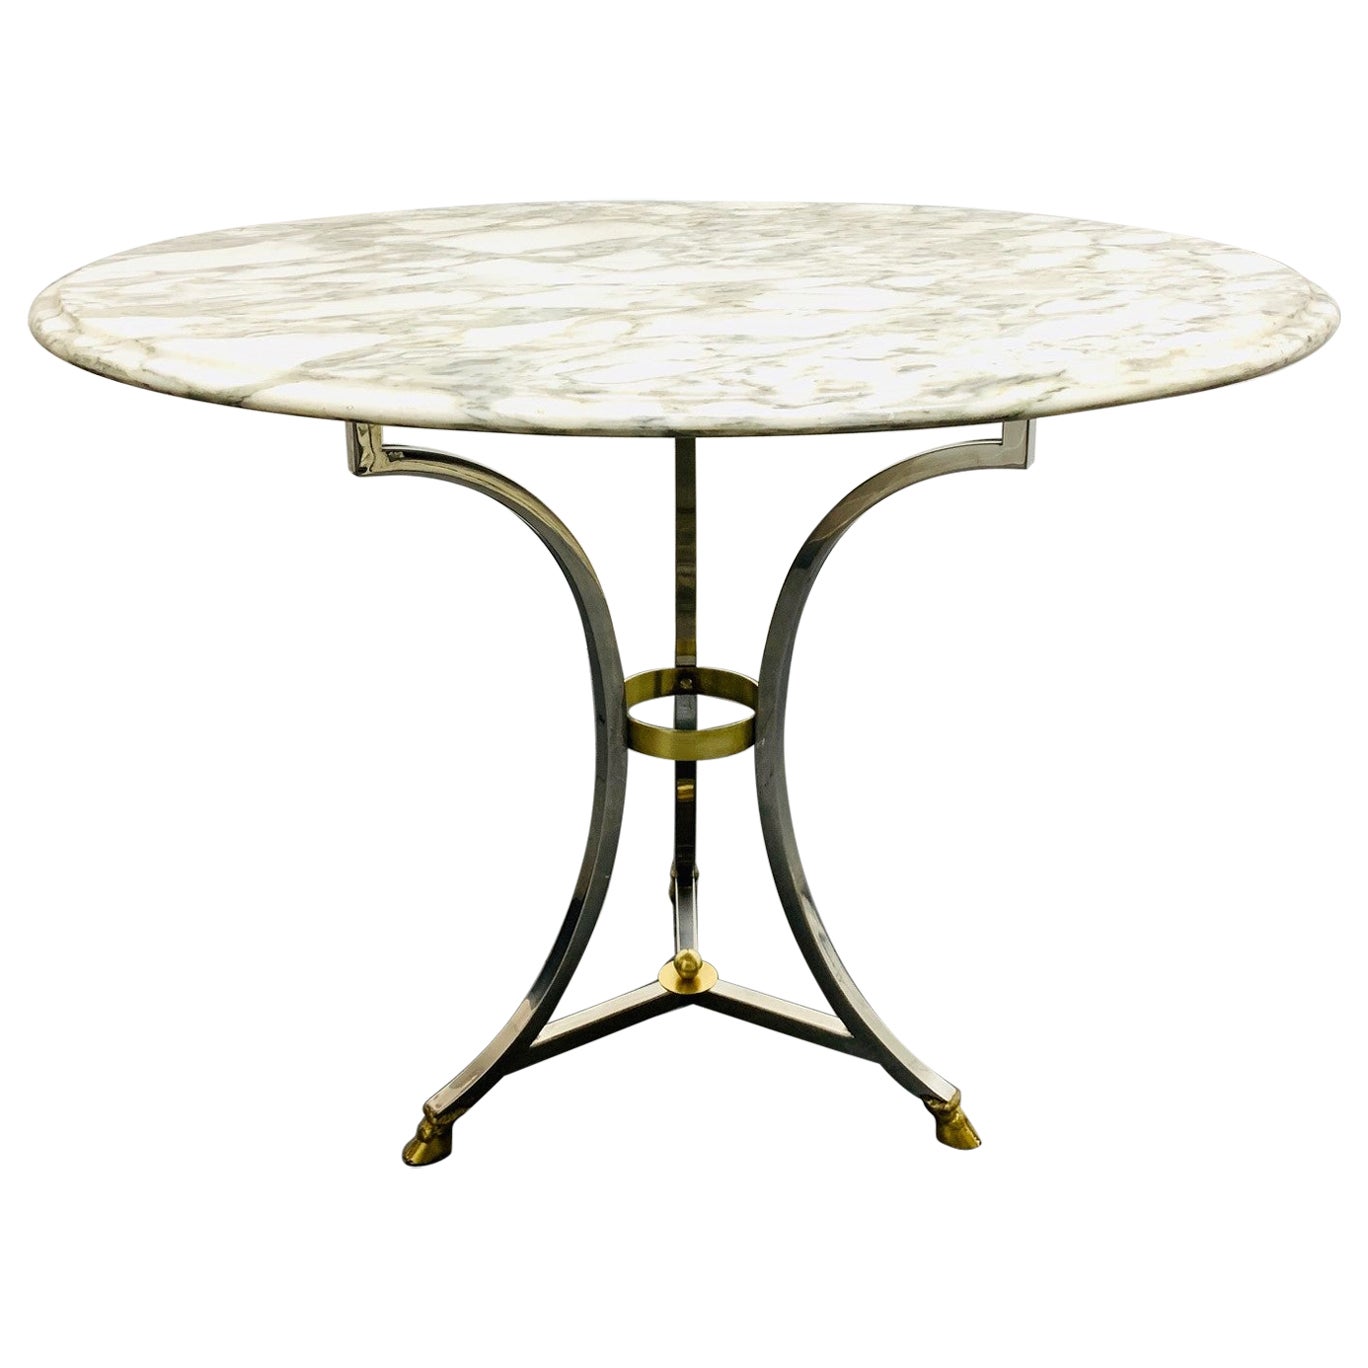 Chrome and Brass Marble-Top Table Style of Maison Jansen